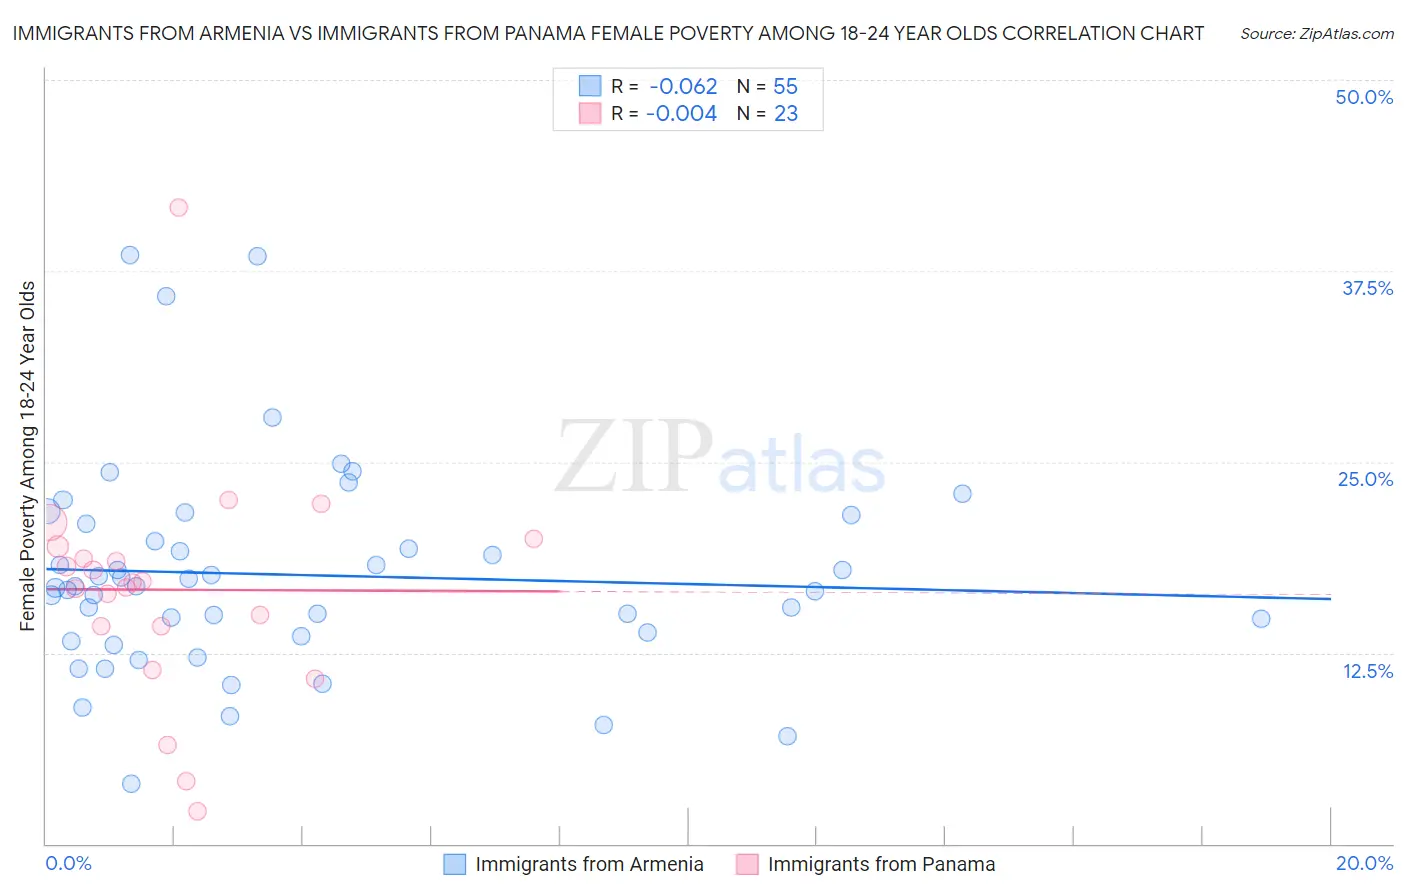 Immigrants from Armenia vs Immigrants from Panama Female Poverty Among 18-24 Year Olds